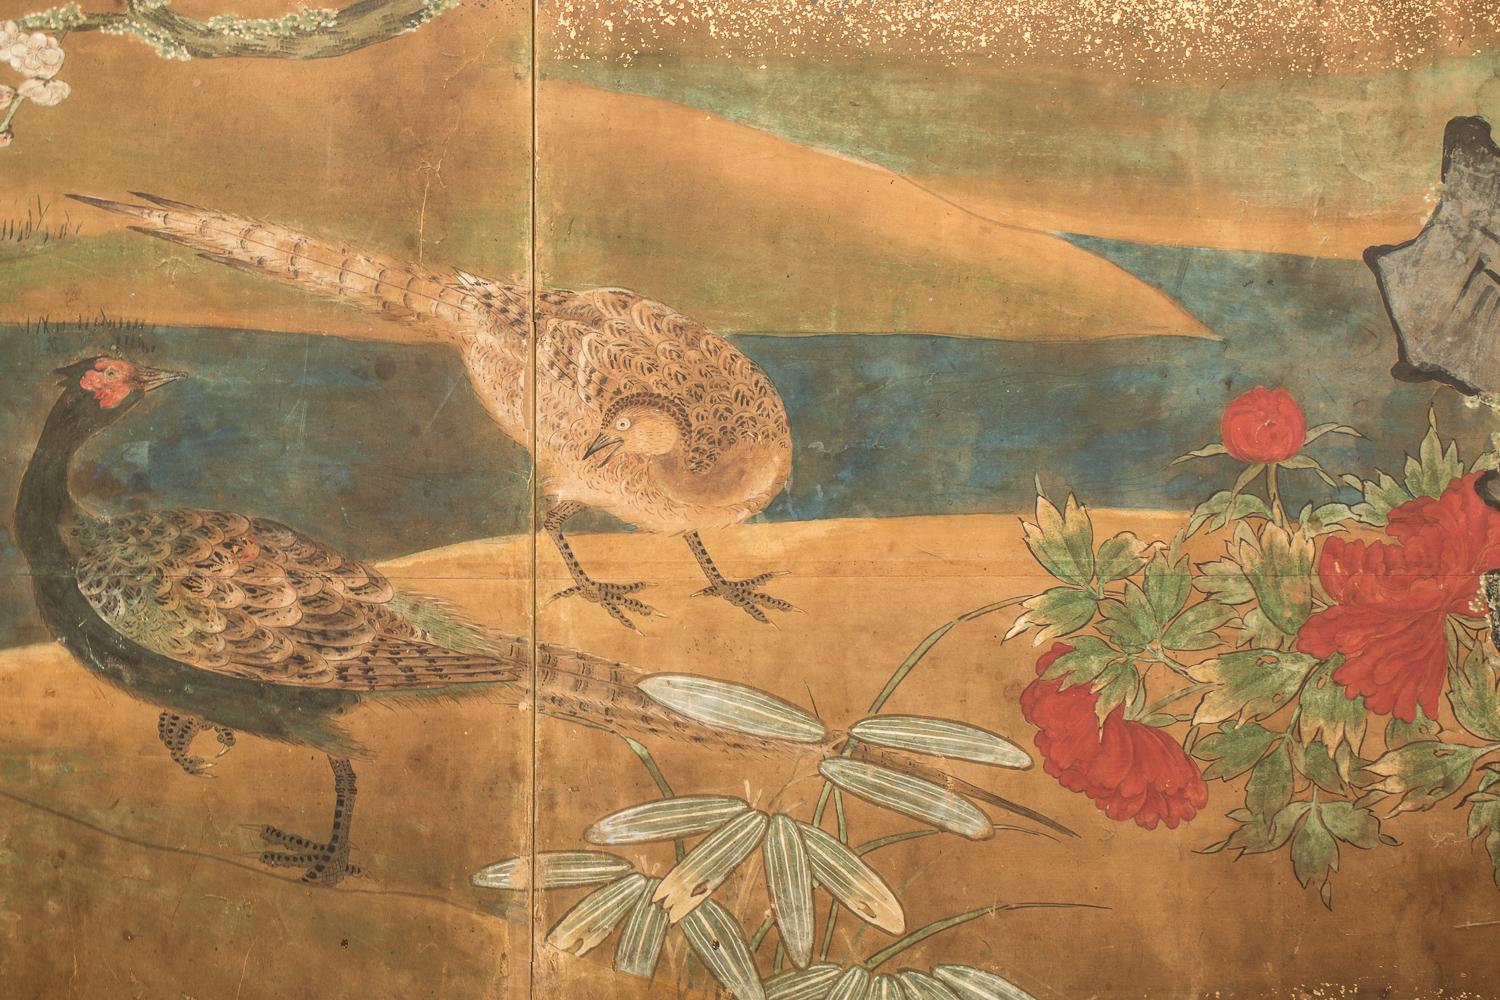 Japanese six-panel screen: waterfall and cherry in Audubon landscape, Edo period painting, 18th century, depicting summer and spring. A Kano School painting executed in mineral pigments on paper with gold dust and a silk brocade border.